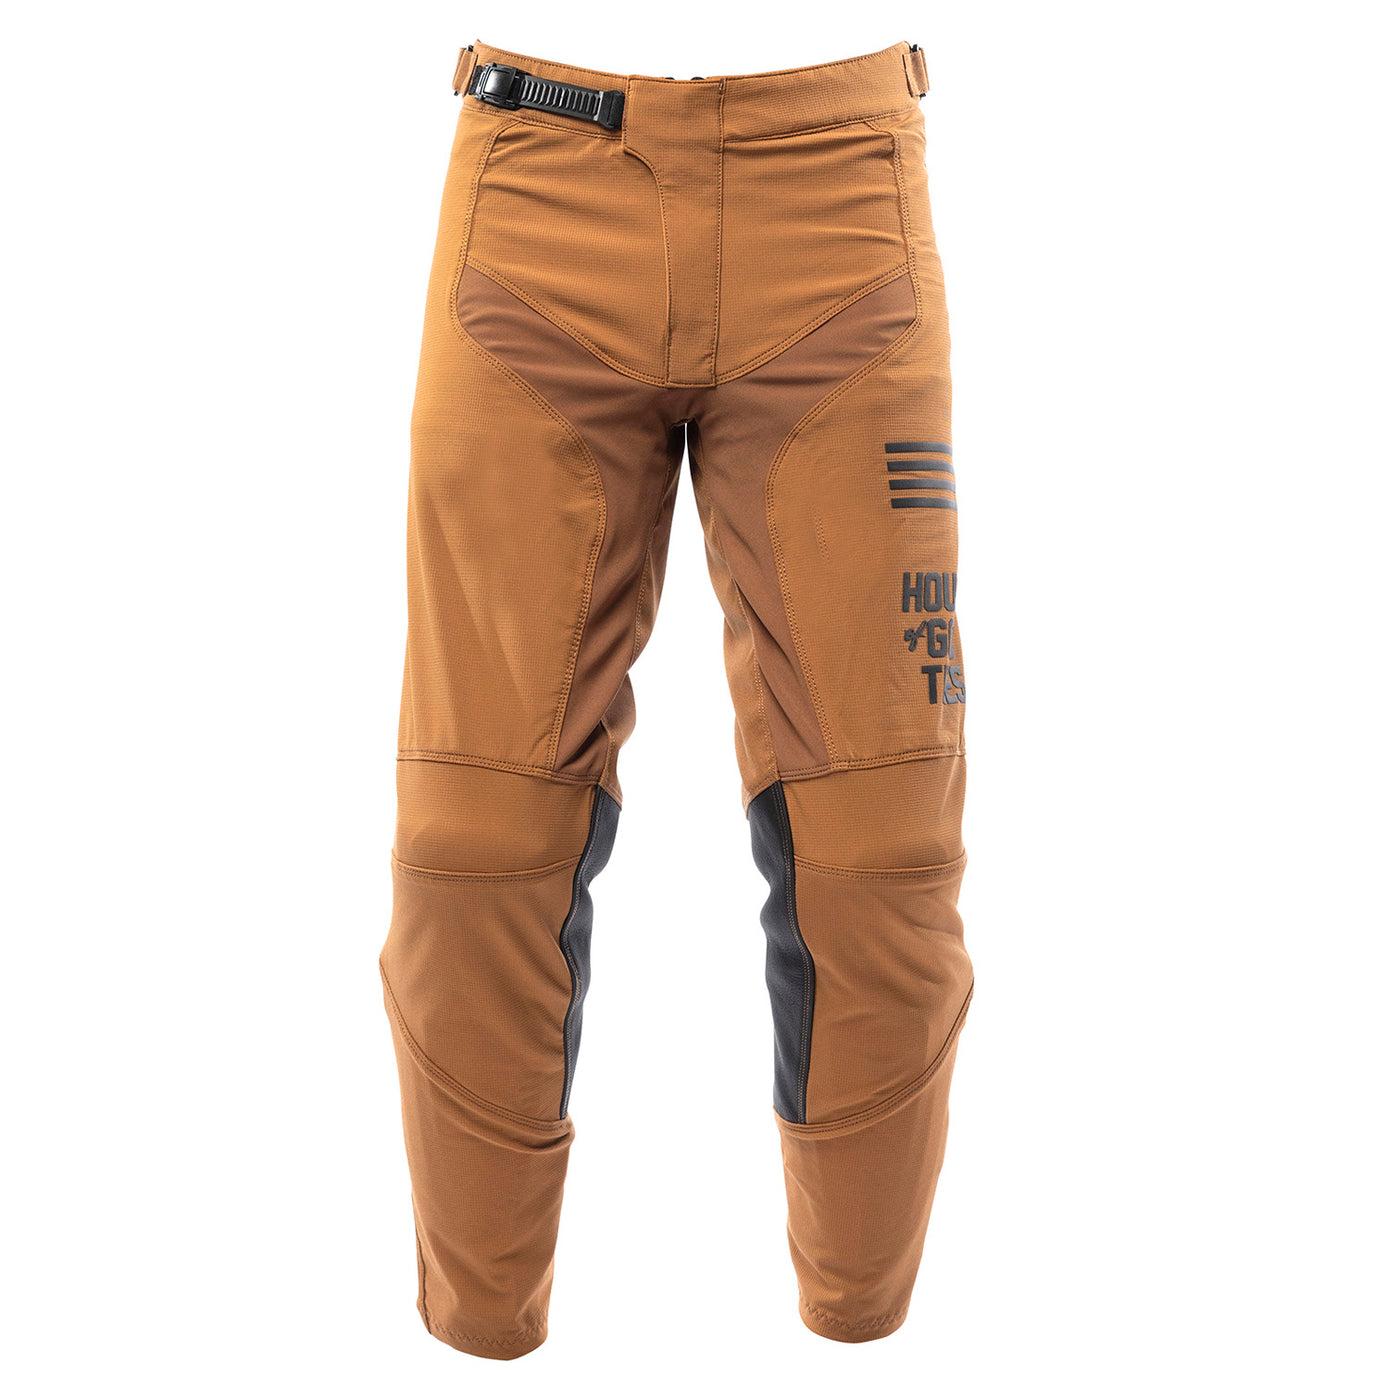 Fasthouse Grindhouse Sanguaro Pant